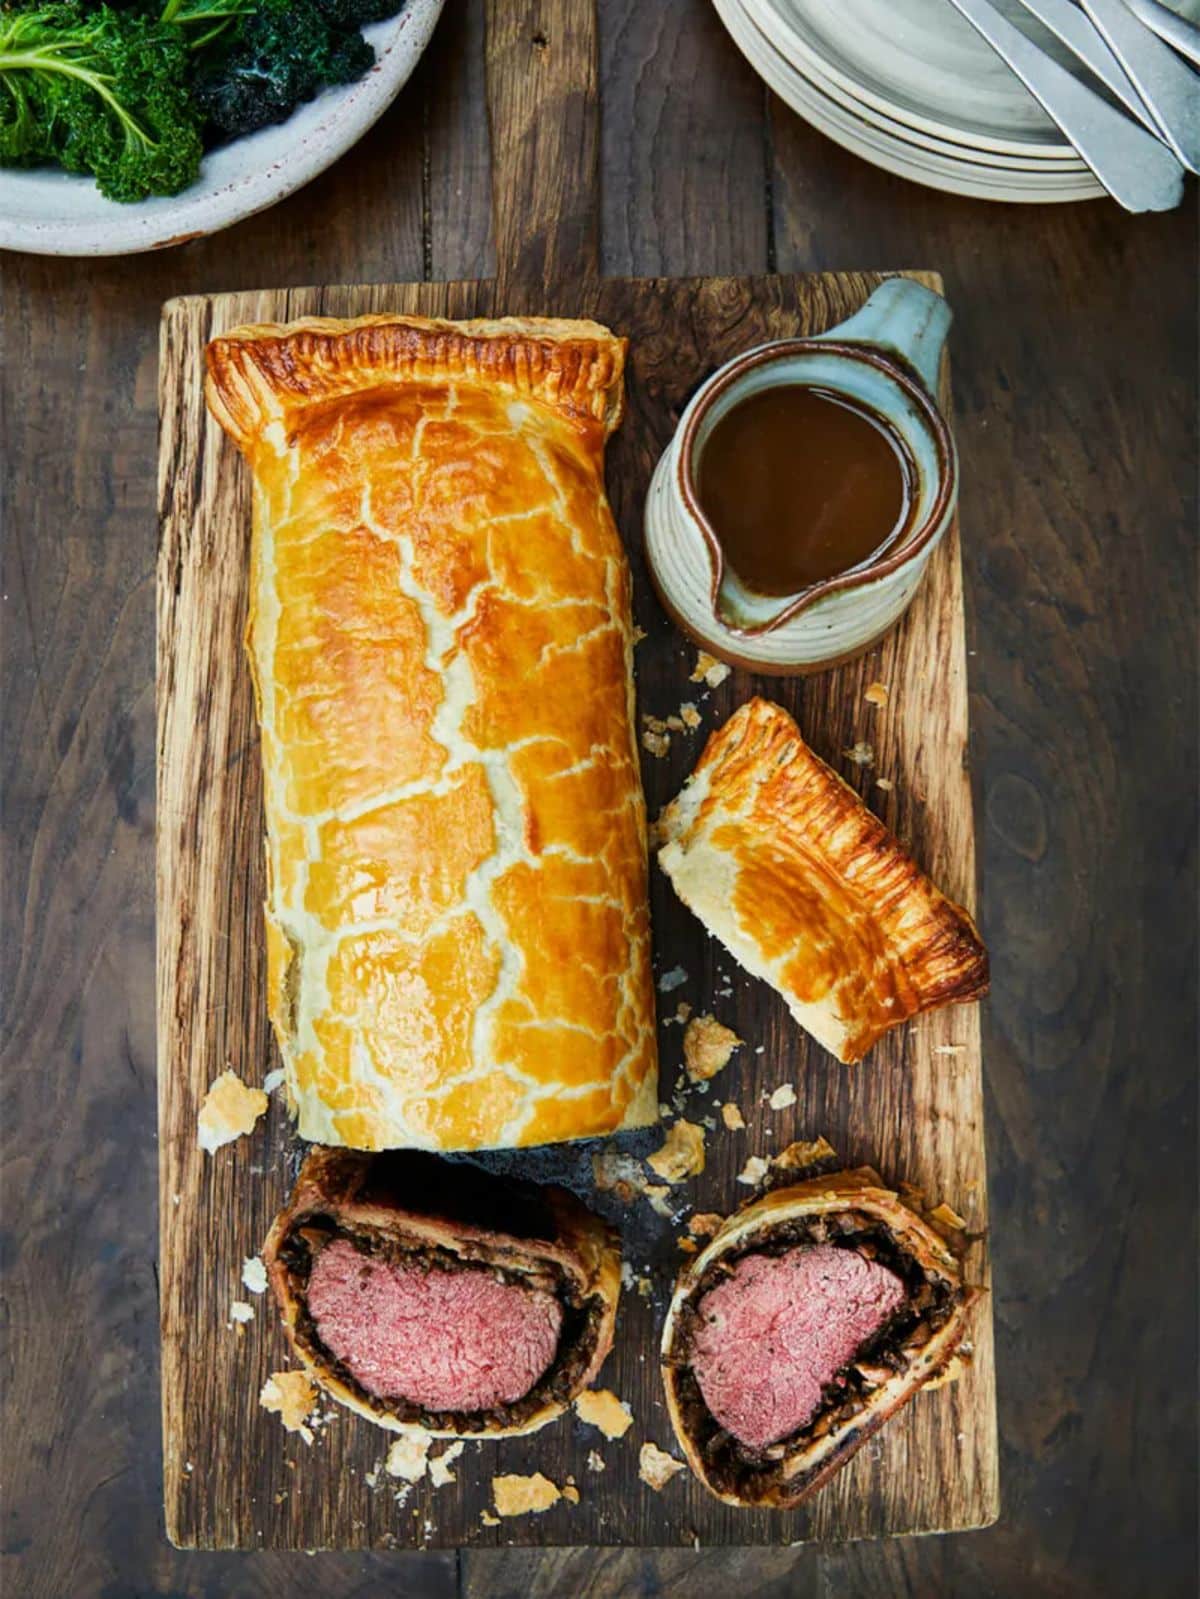 Scrumptious venison wellington with gray on a wooden tray.